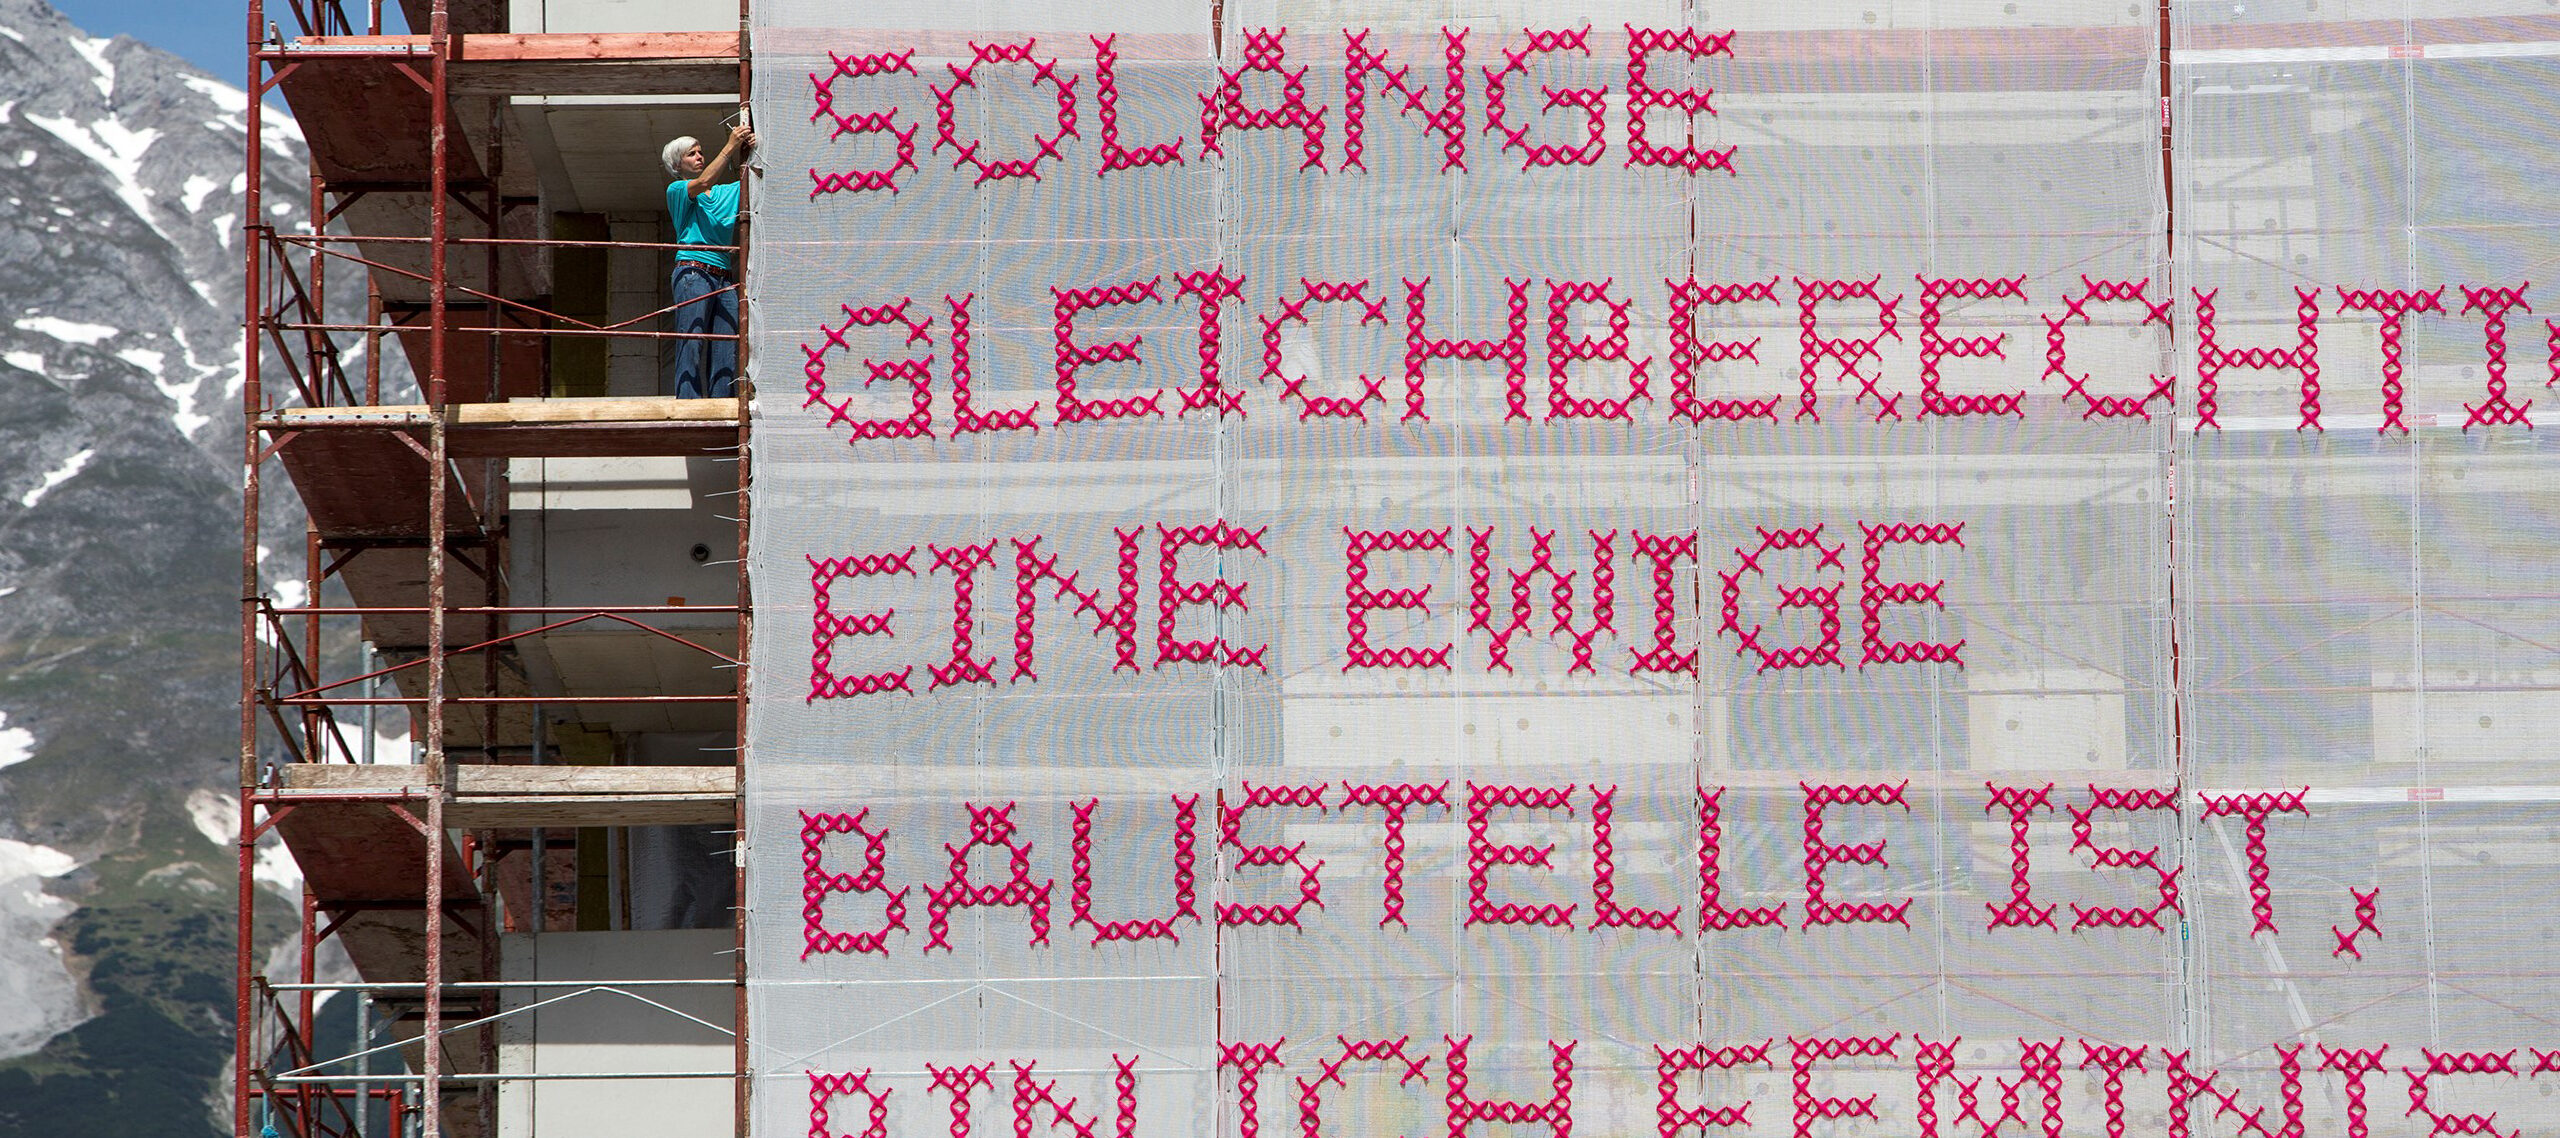 A light-skinned woman with short, platinum blonde hair stands on scaffolding attaching a very large panel of white gauzy material with “Solange Gleichberechtigung eine ewige Baustelle ist, bin ich Feministin” stitched in bright pink lettering to the bars of the scaffold. In the background you can see a bight blue sky and snow capped mountain.